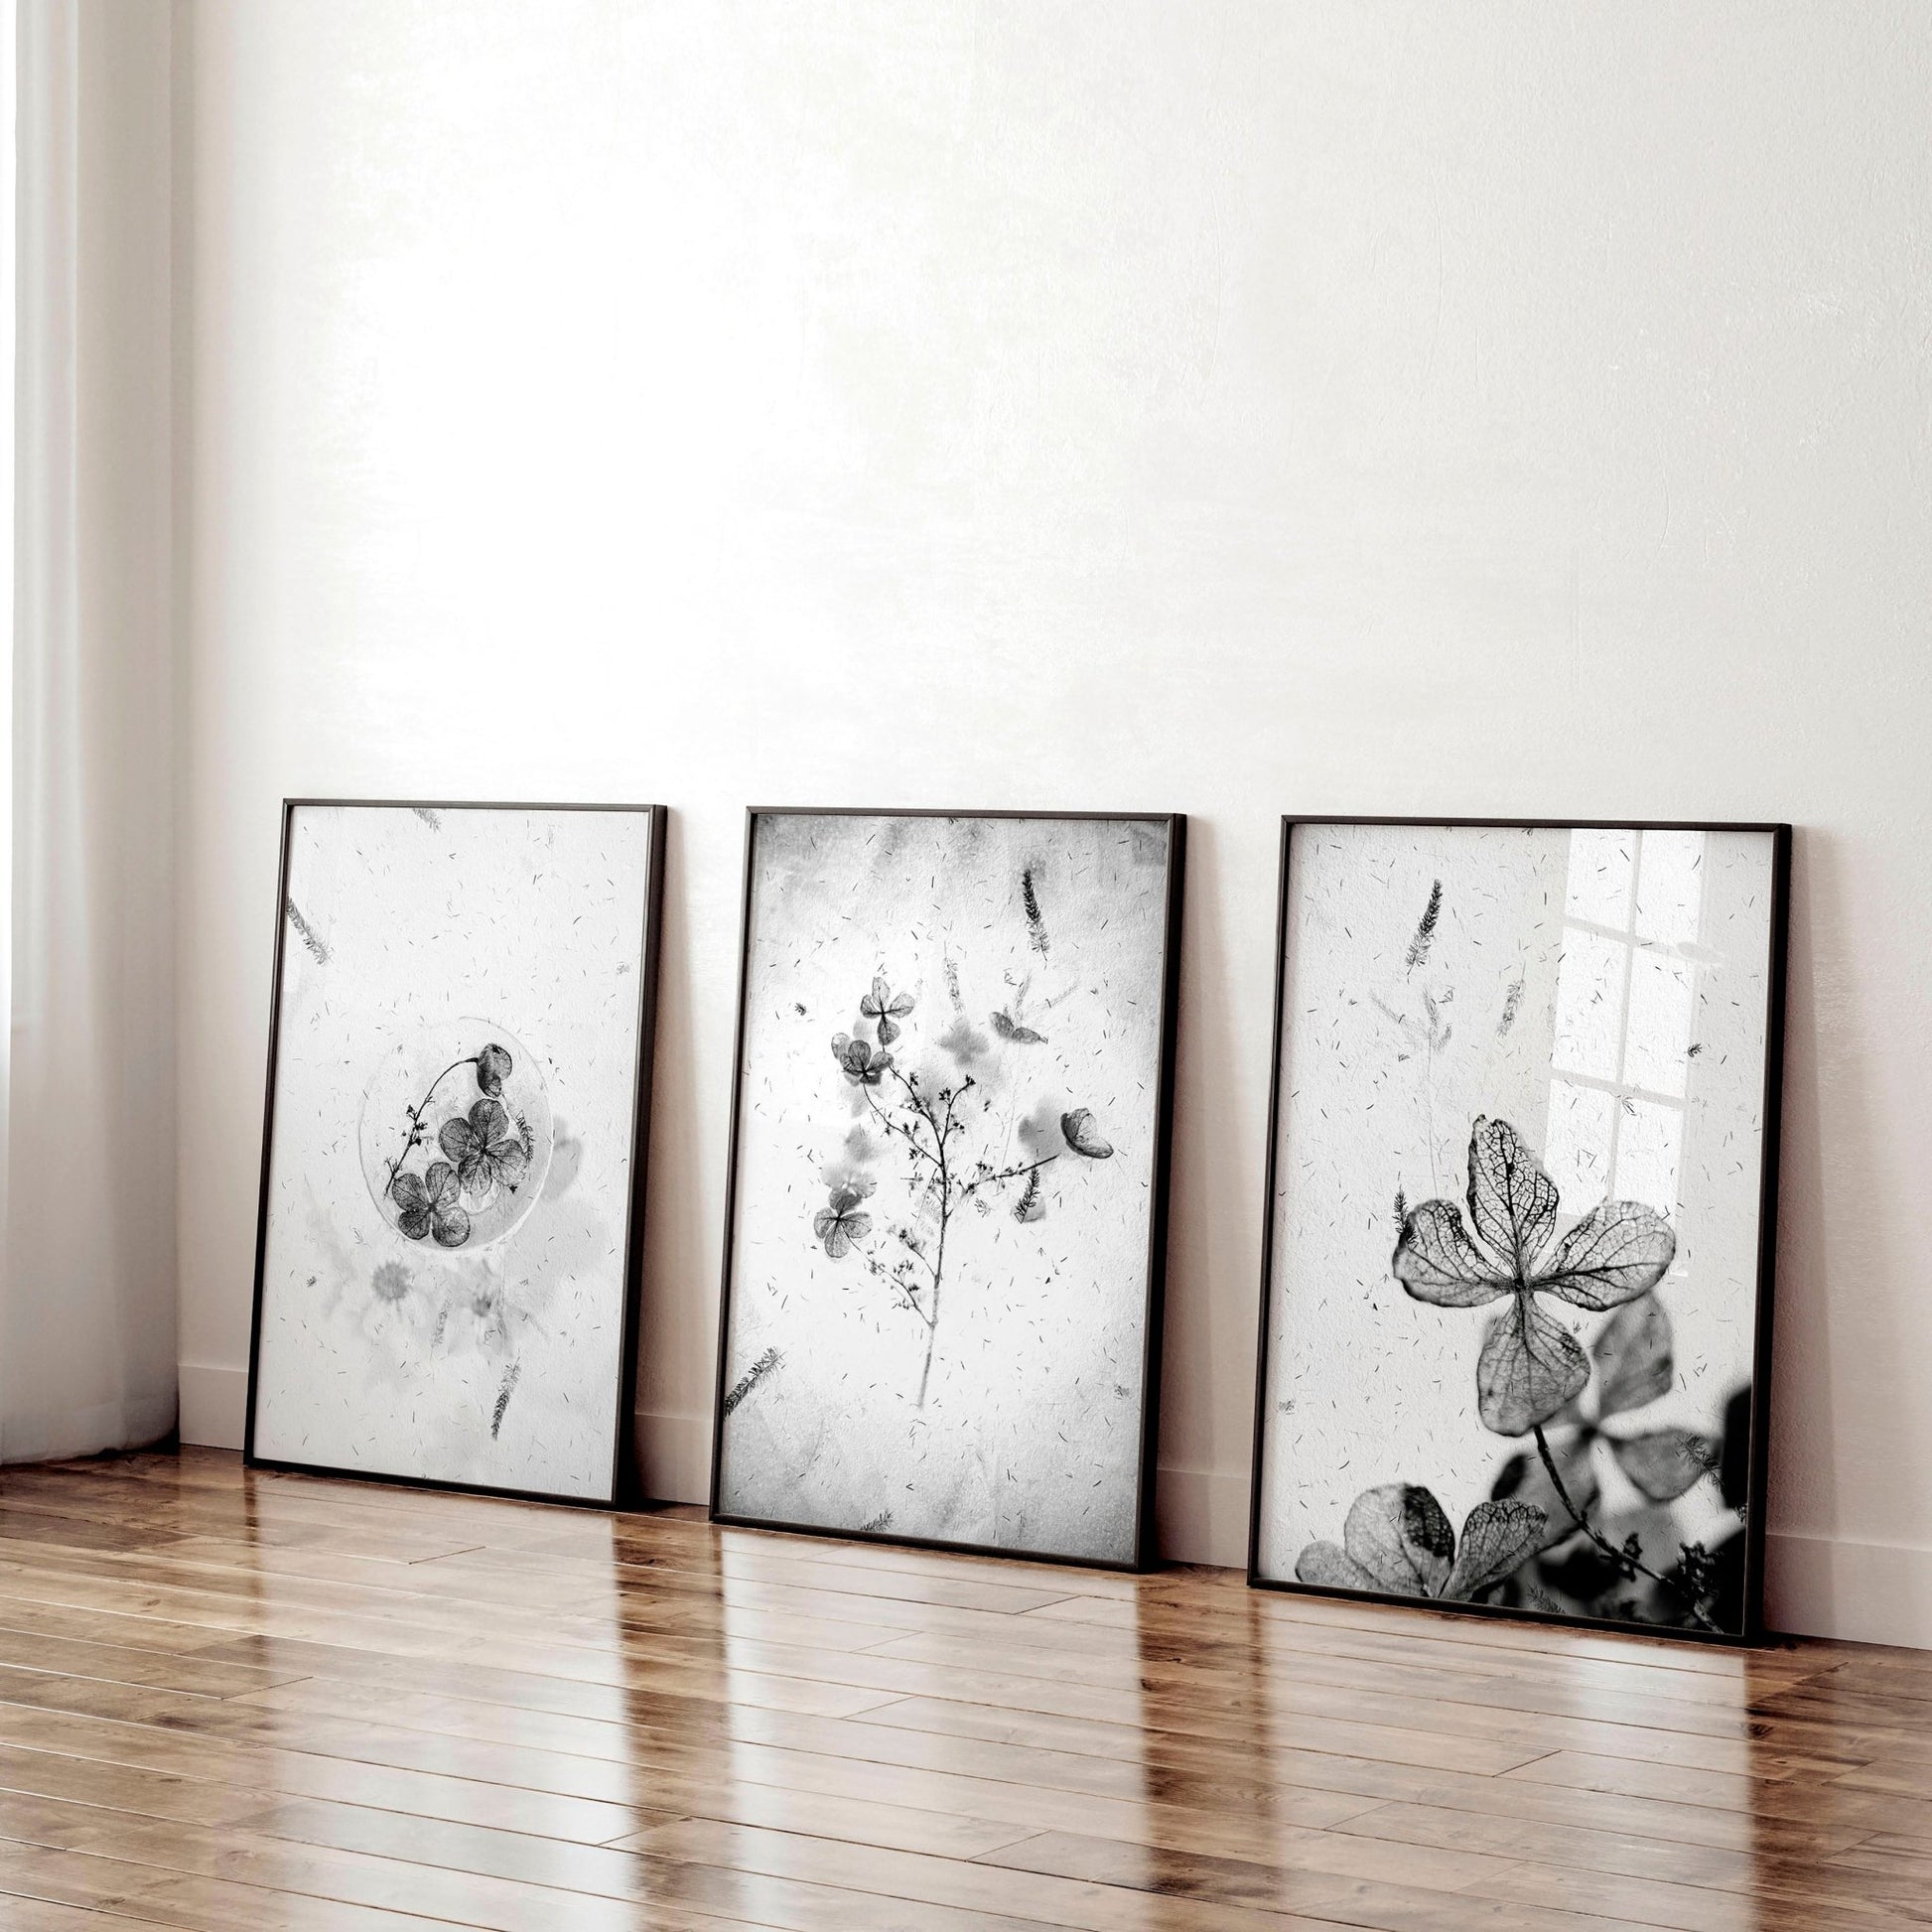 Professional office office decor ideas | set of 3 wall art prints - About Wall Art